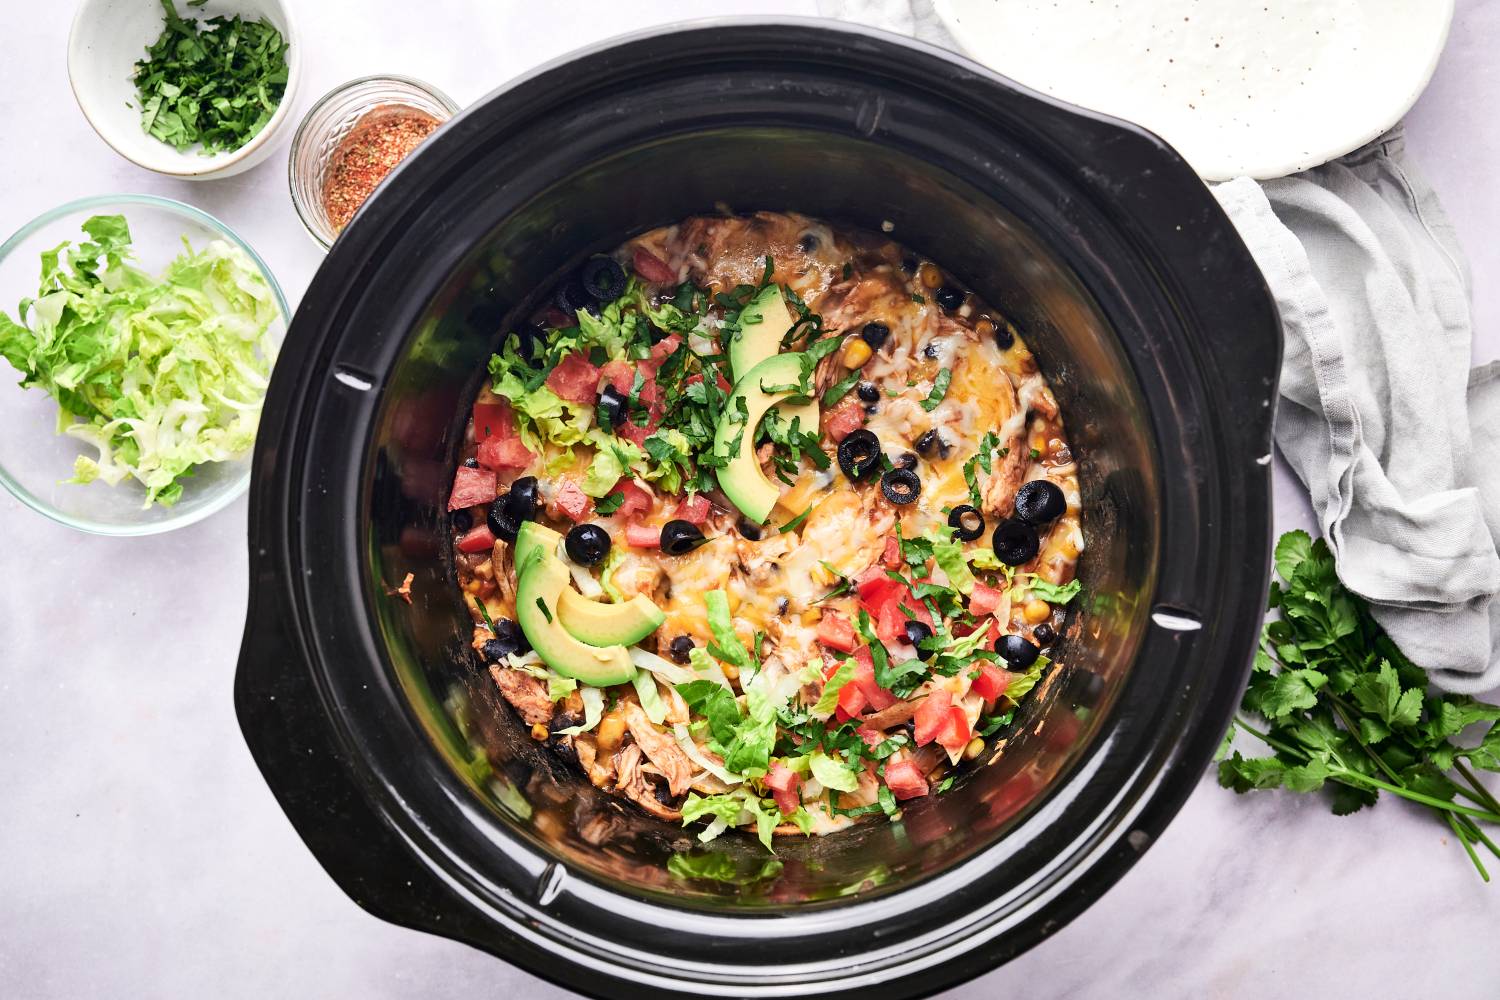 Slow cooker chicken enchilada casserole in a crockpot with avocado, black olives, lettuce, and tomatoes.